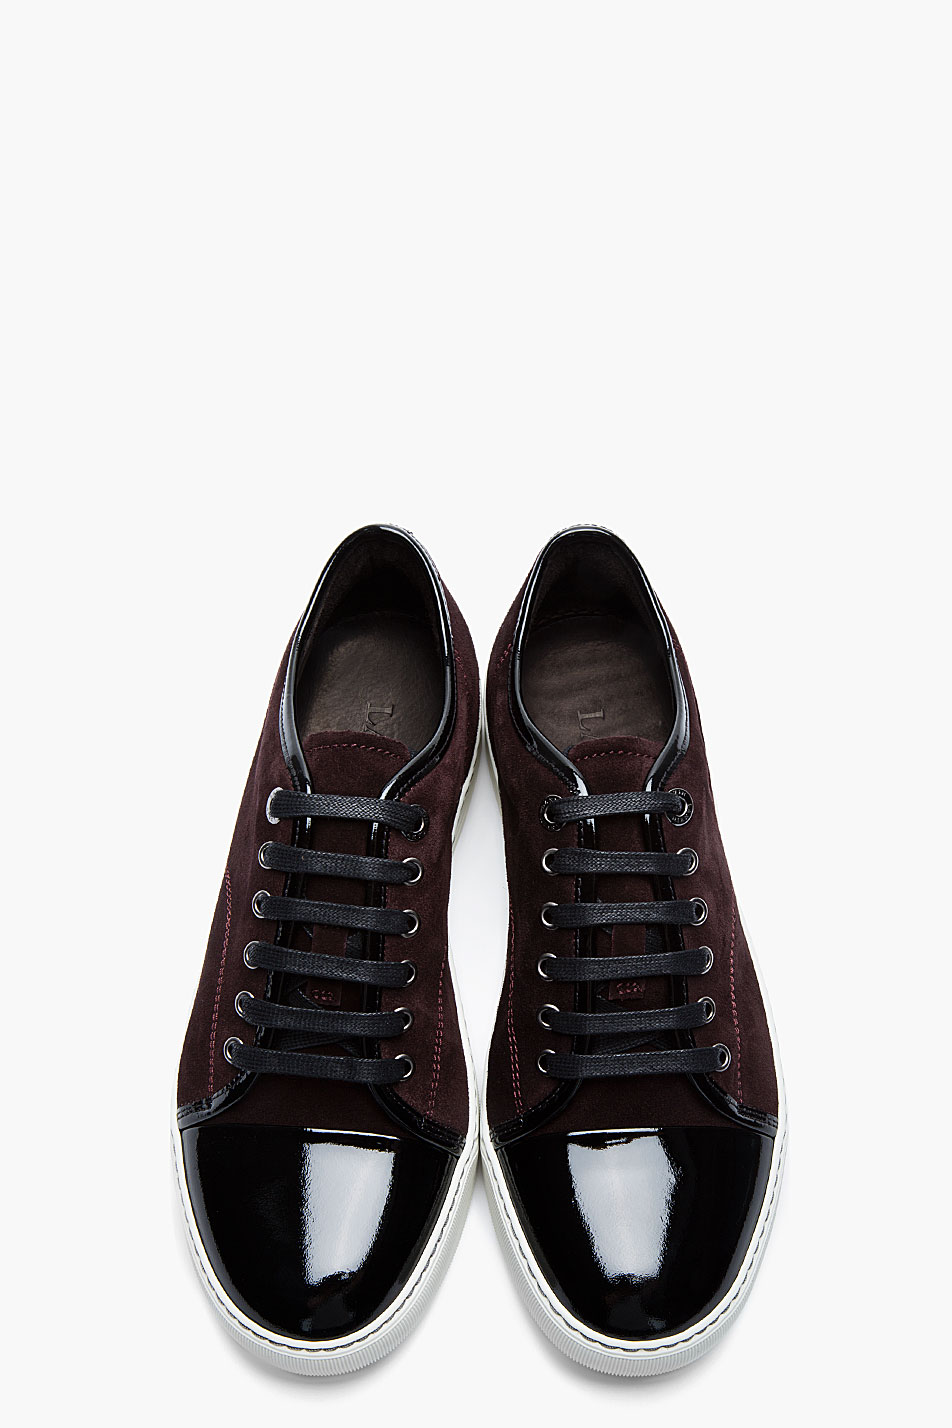 Lyst Lanvin Burgundy Patent and Suede Tennis Shoes in